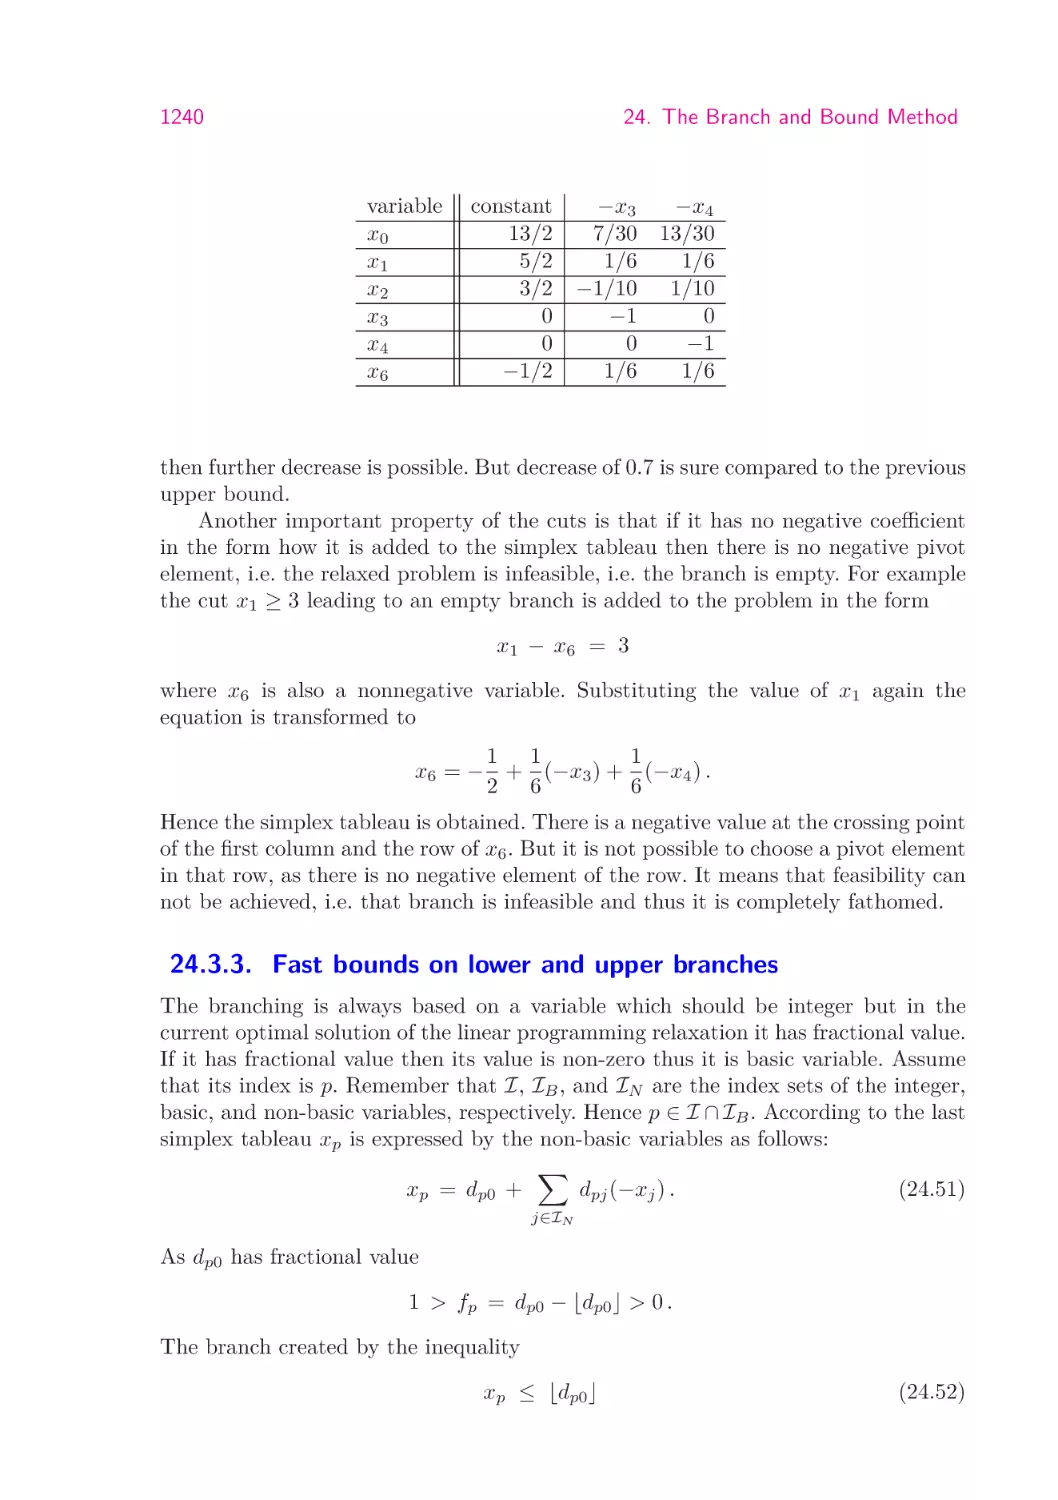 24.3.3.  Fast bounds on lower and upper branches